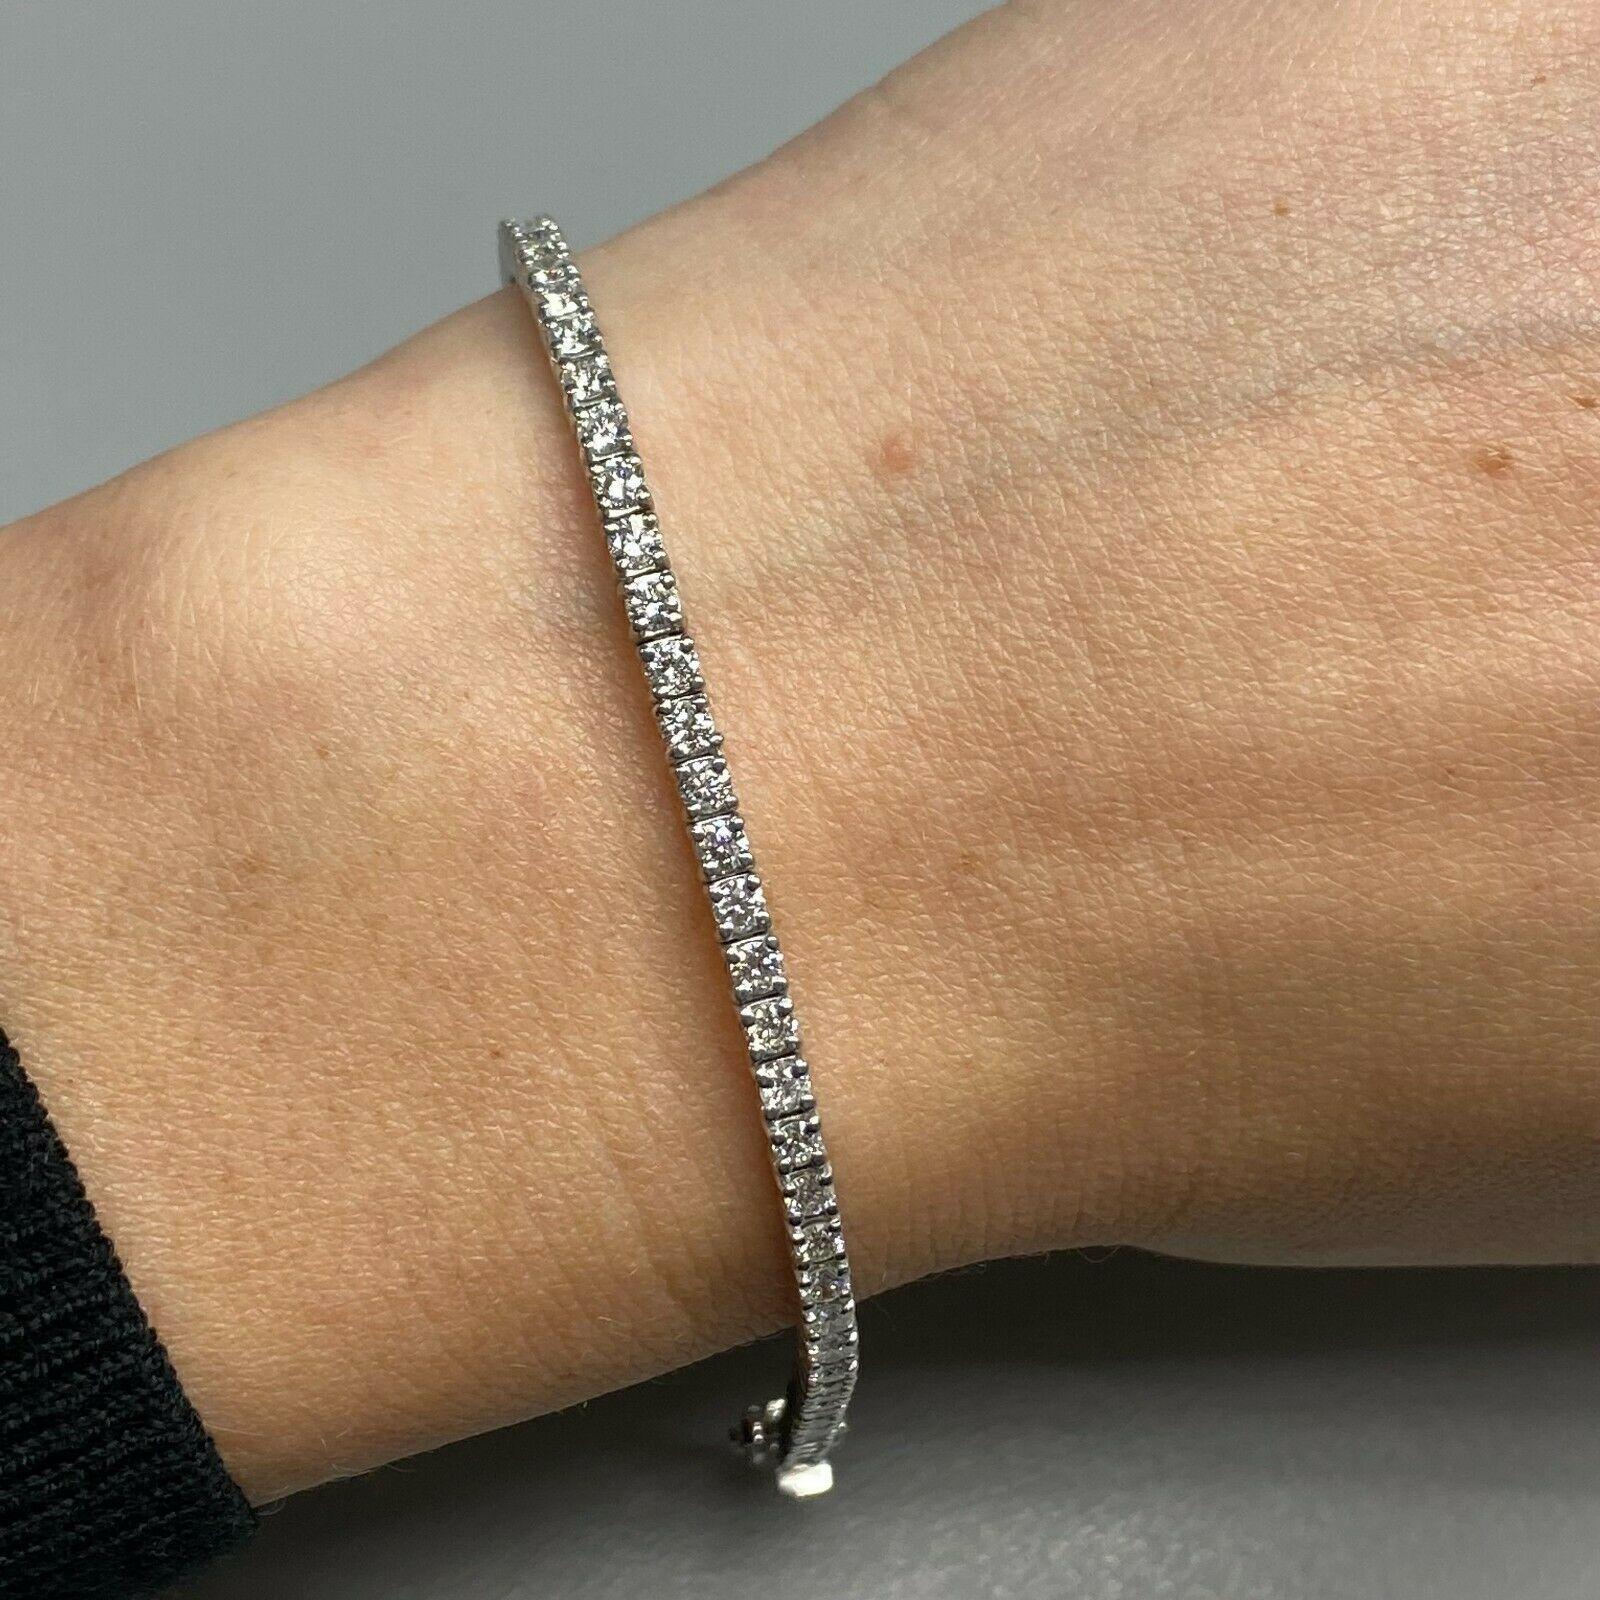 Contemporary 14k White Gold Diamond Tennis Bracelet Weighing 3.33 Ctw For Sale